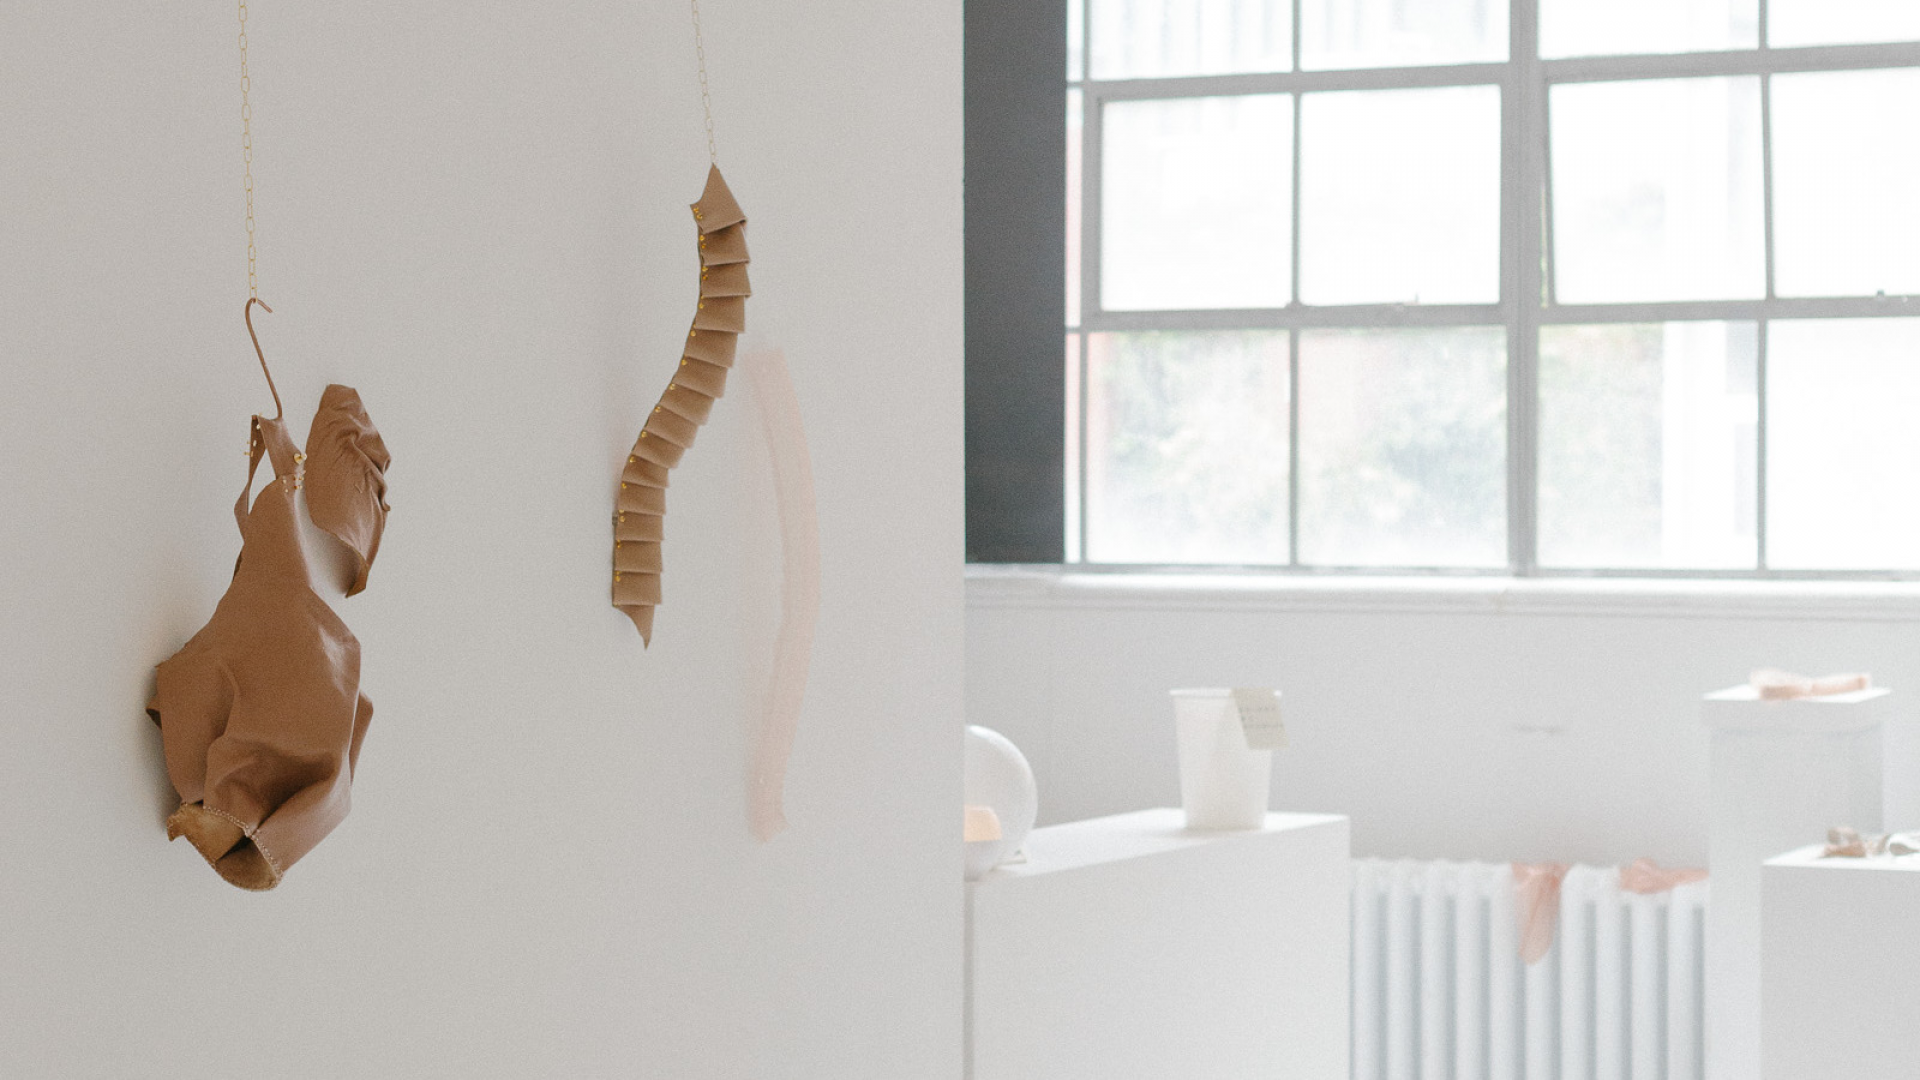 Installation view of a white room with window and three objects mounted to the wall on the left